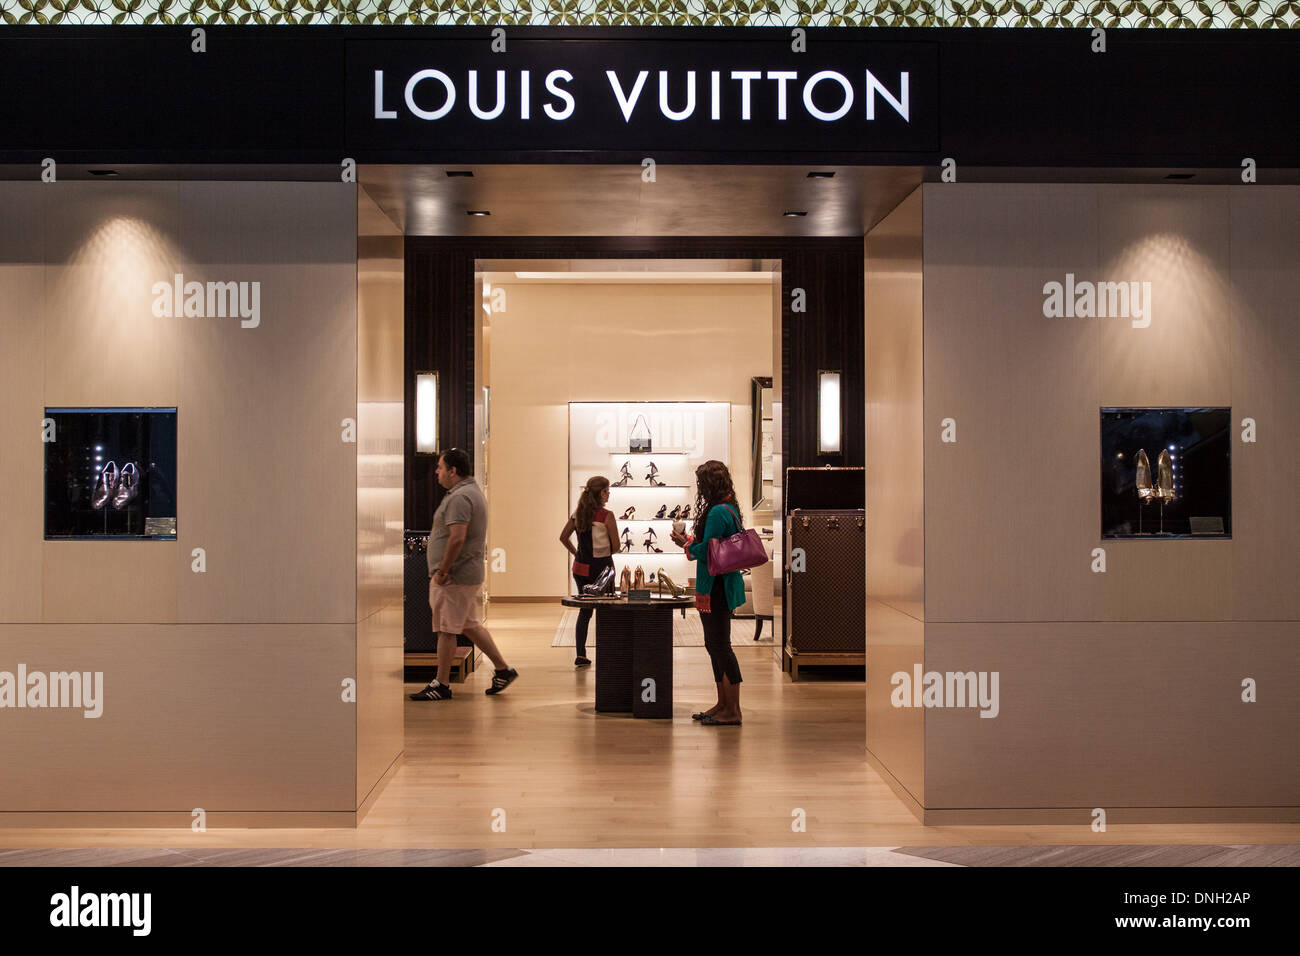 BUYERS SHOPPING IN THE LOUIS VUITTON BOUTIQUE IN THE SHOPPING CENTER Stock Photo, Royalty Free ...